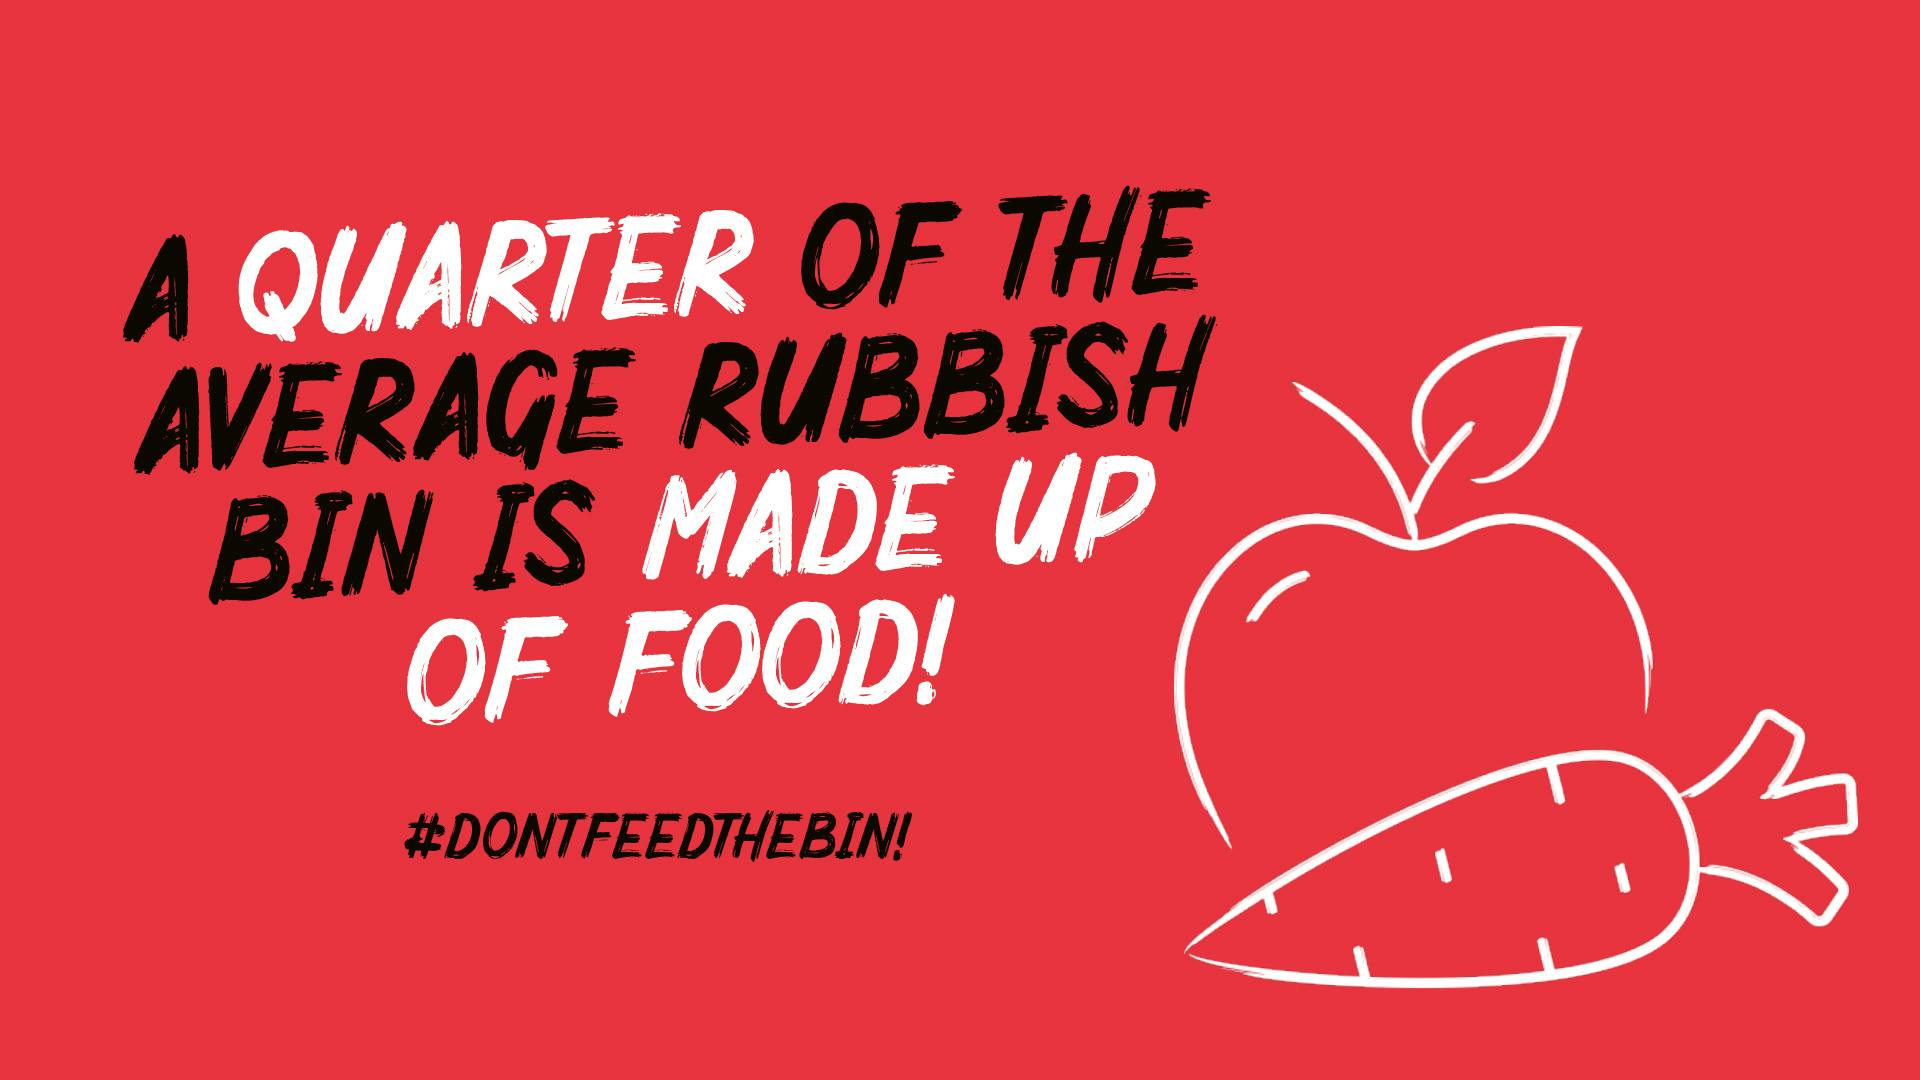 24% of the average rubbish bin in Wales is made up of food waste!